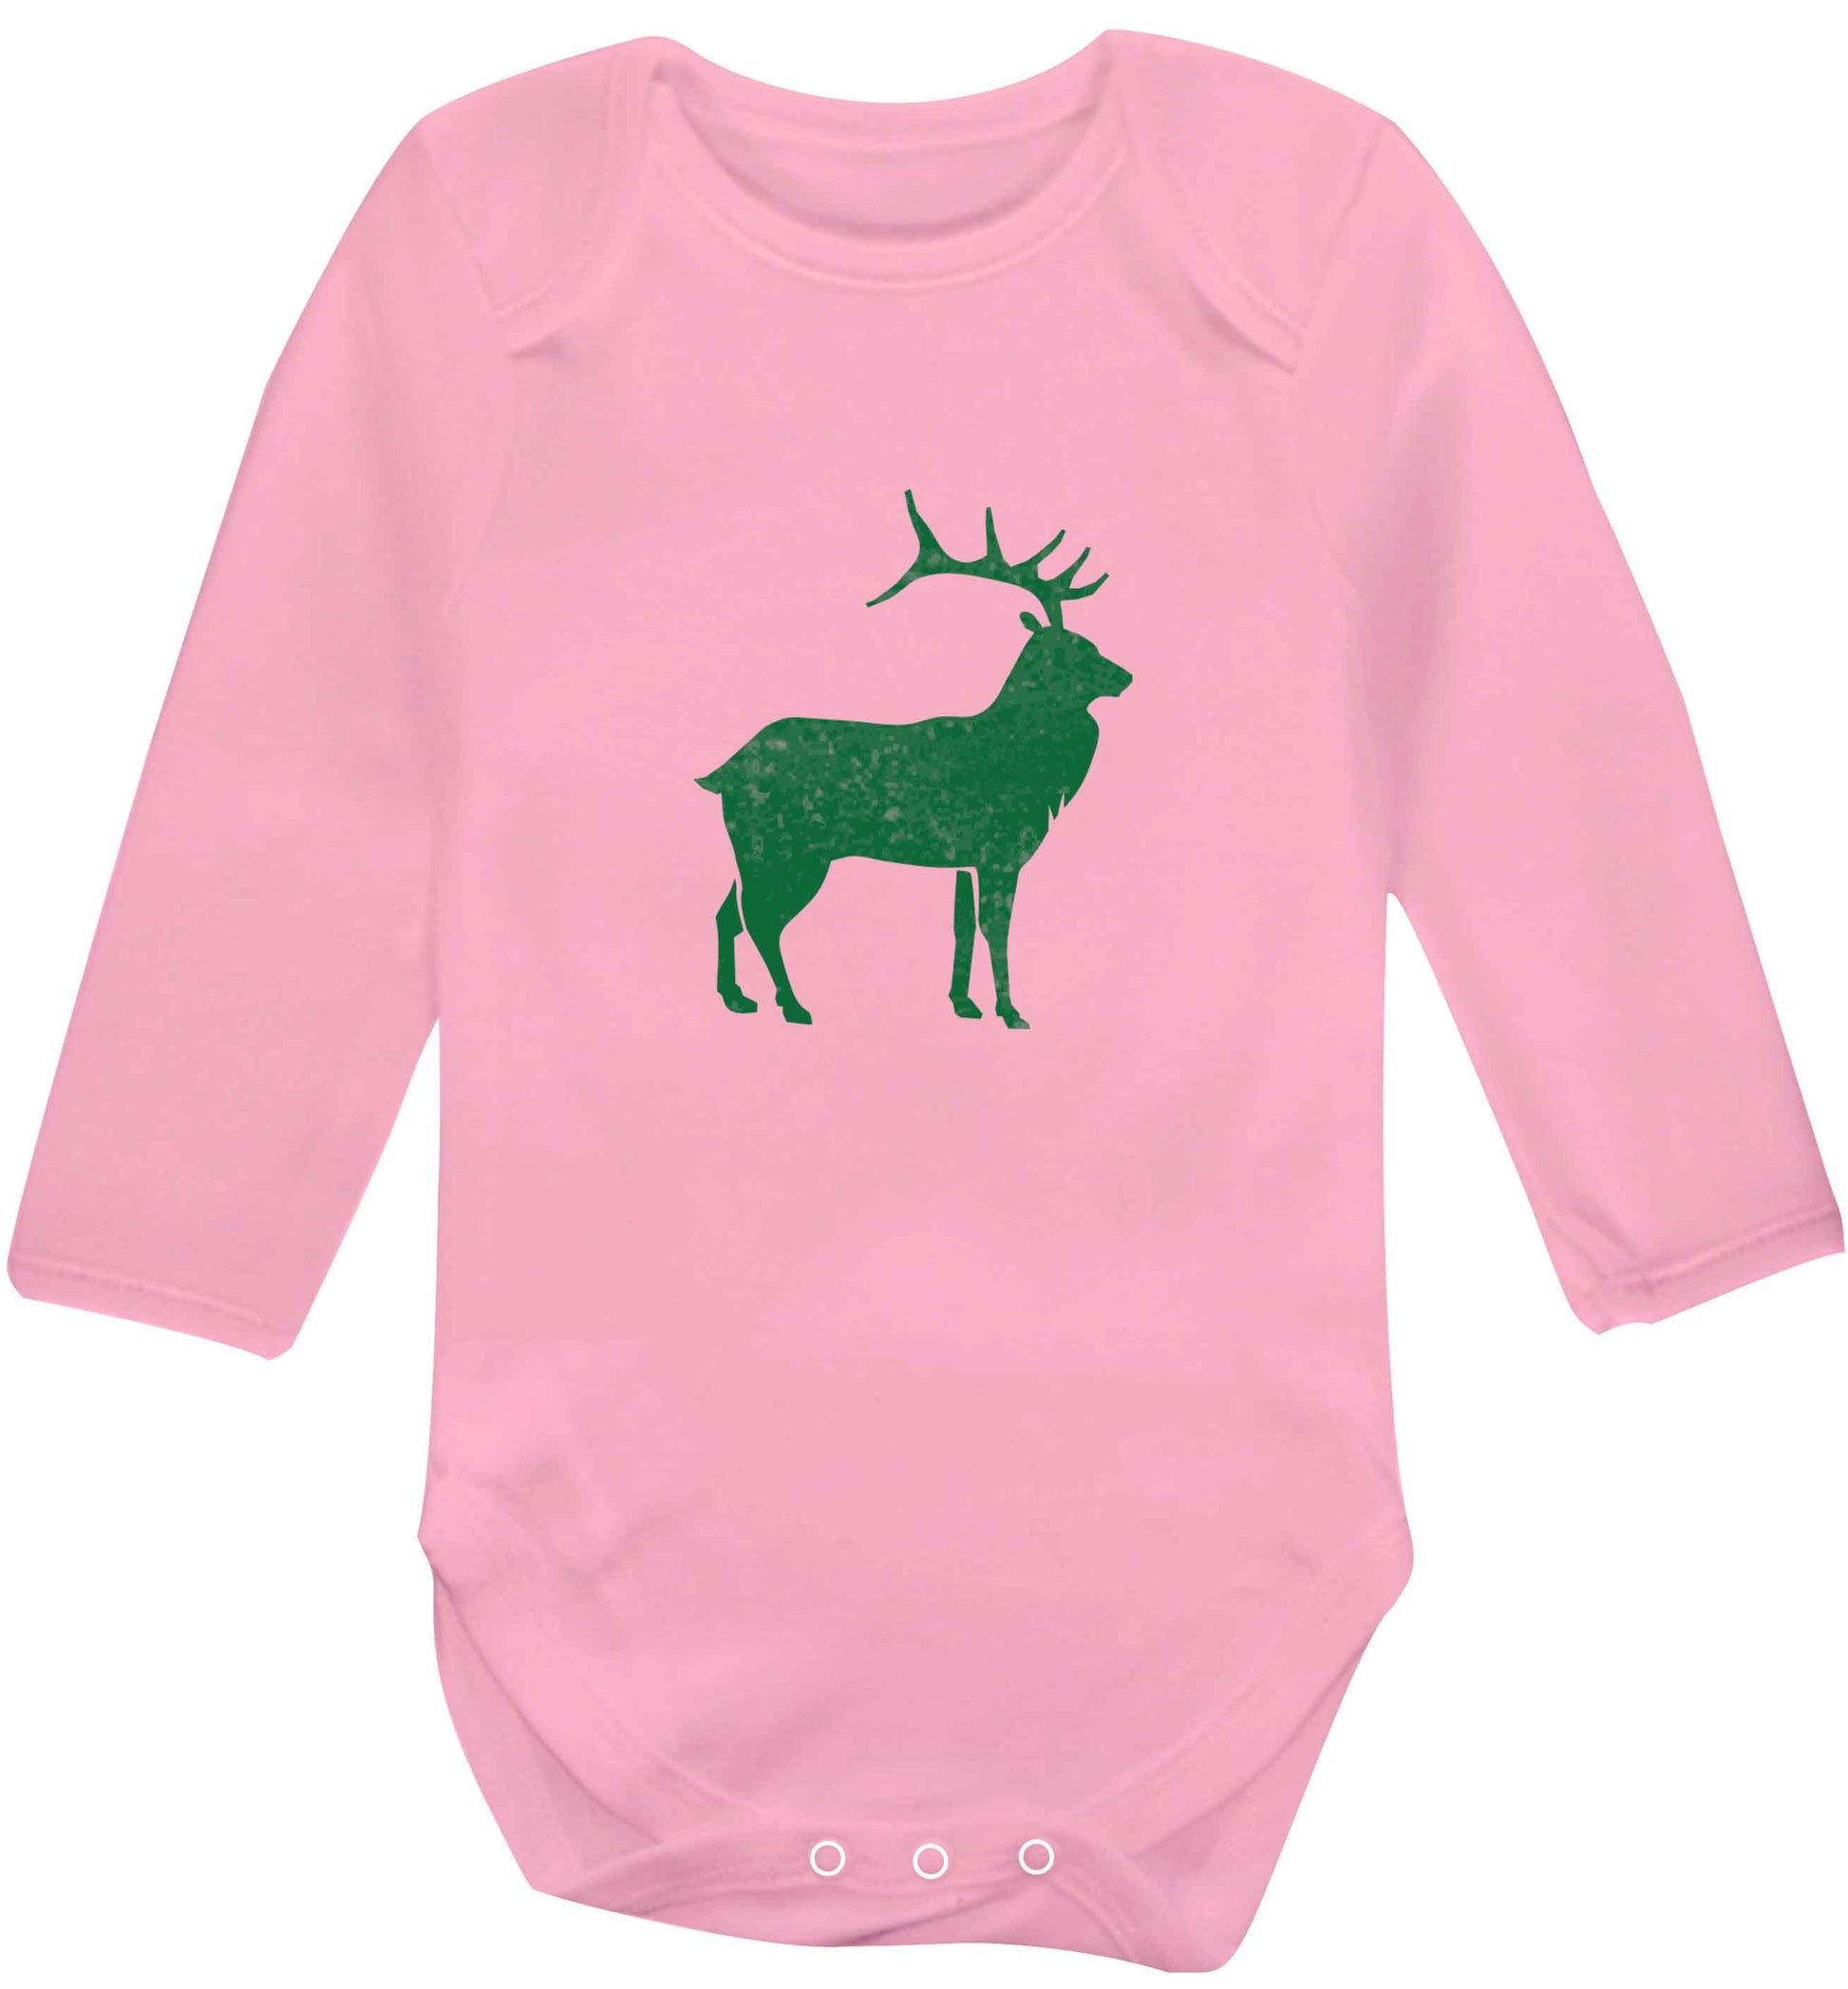 Green stag baby vest long sleeved pale pink 6-12 months